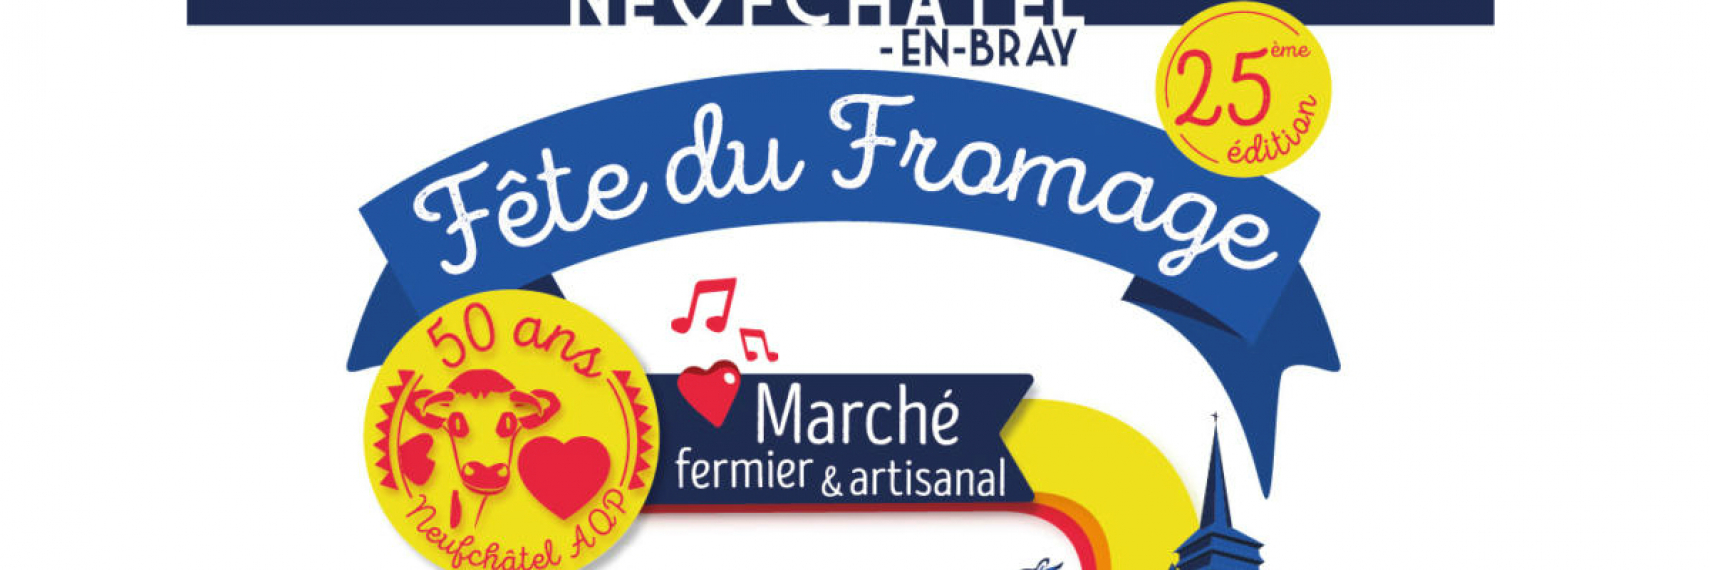 Fete fromage Neufchatel 2019